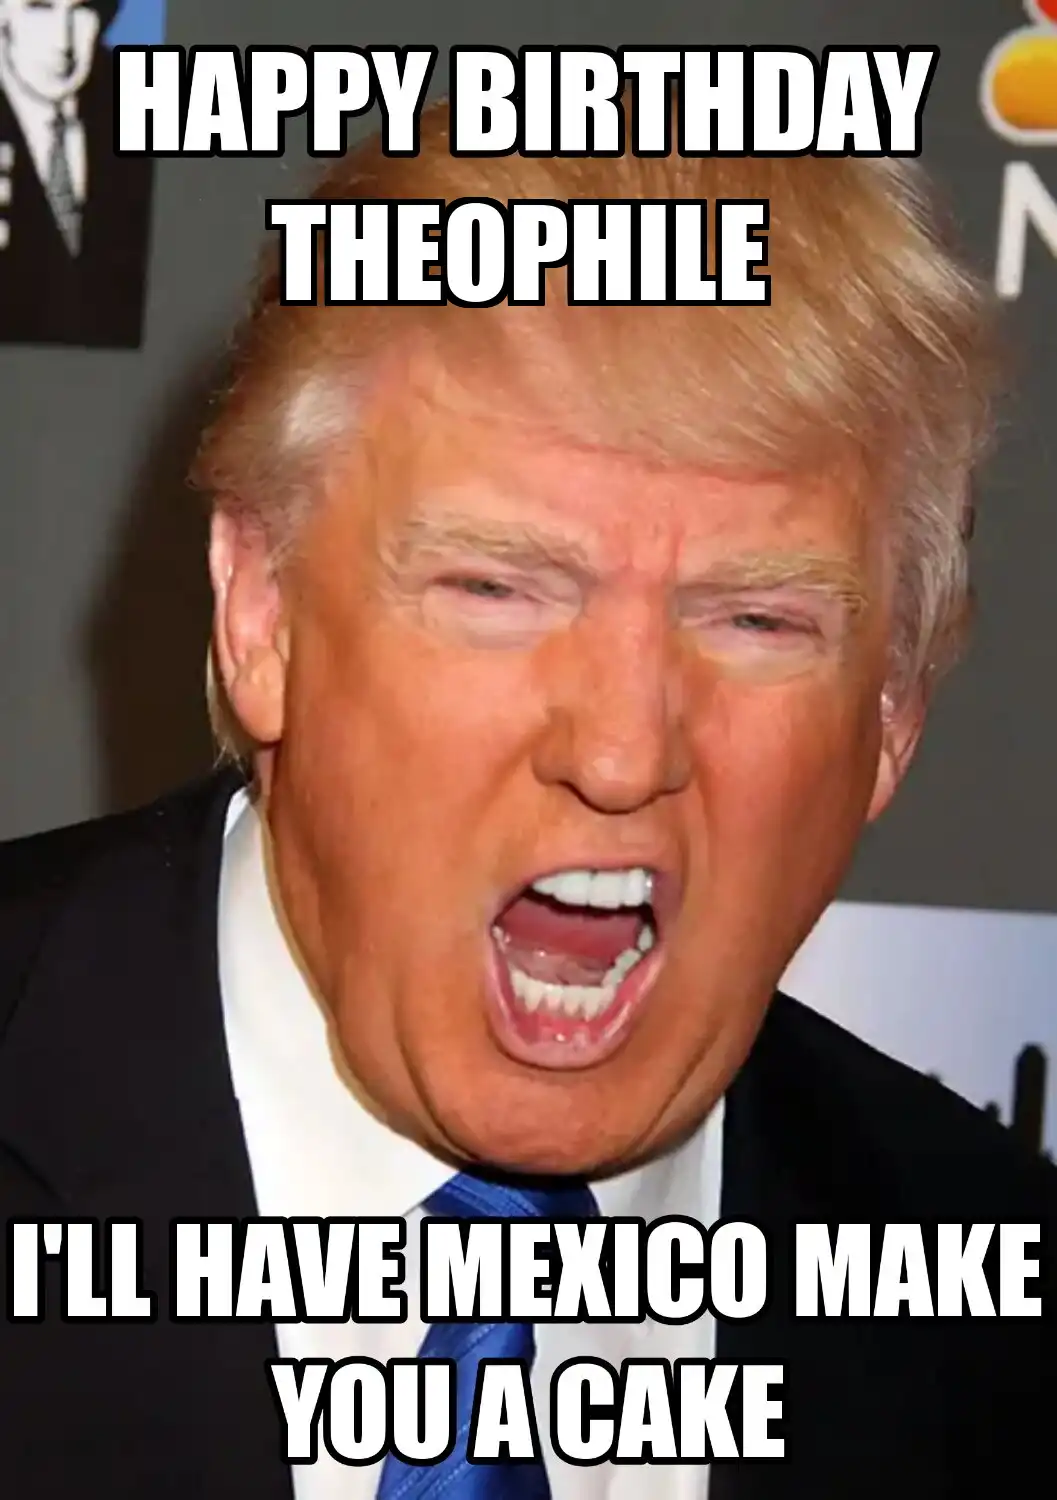 Happy Birthday Theophile Mexico Make You A Cake Meme